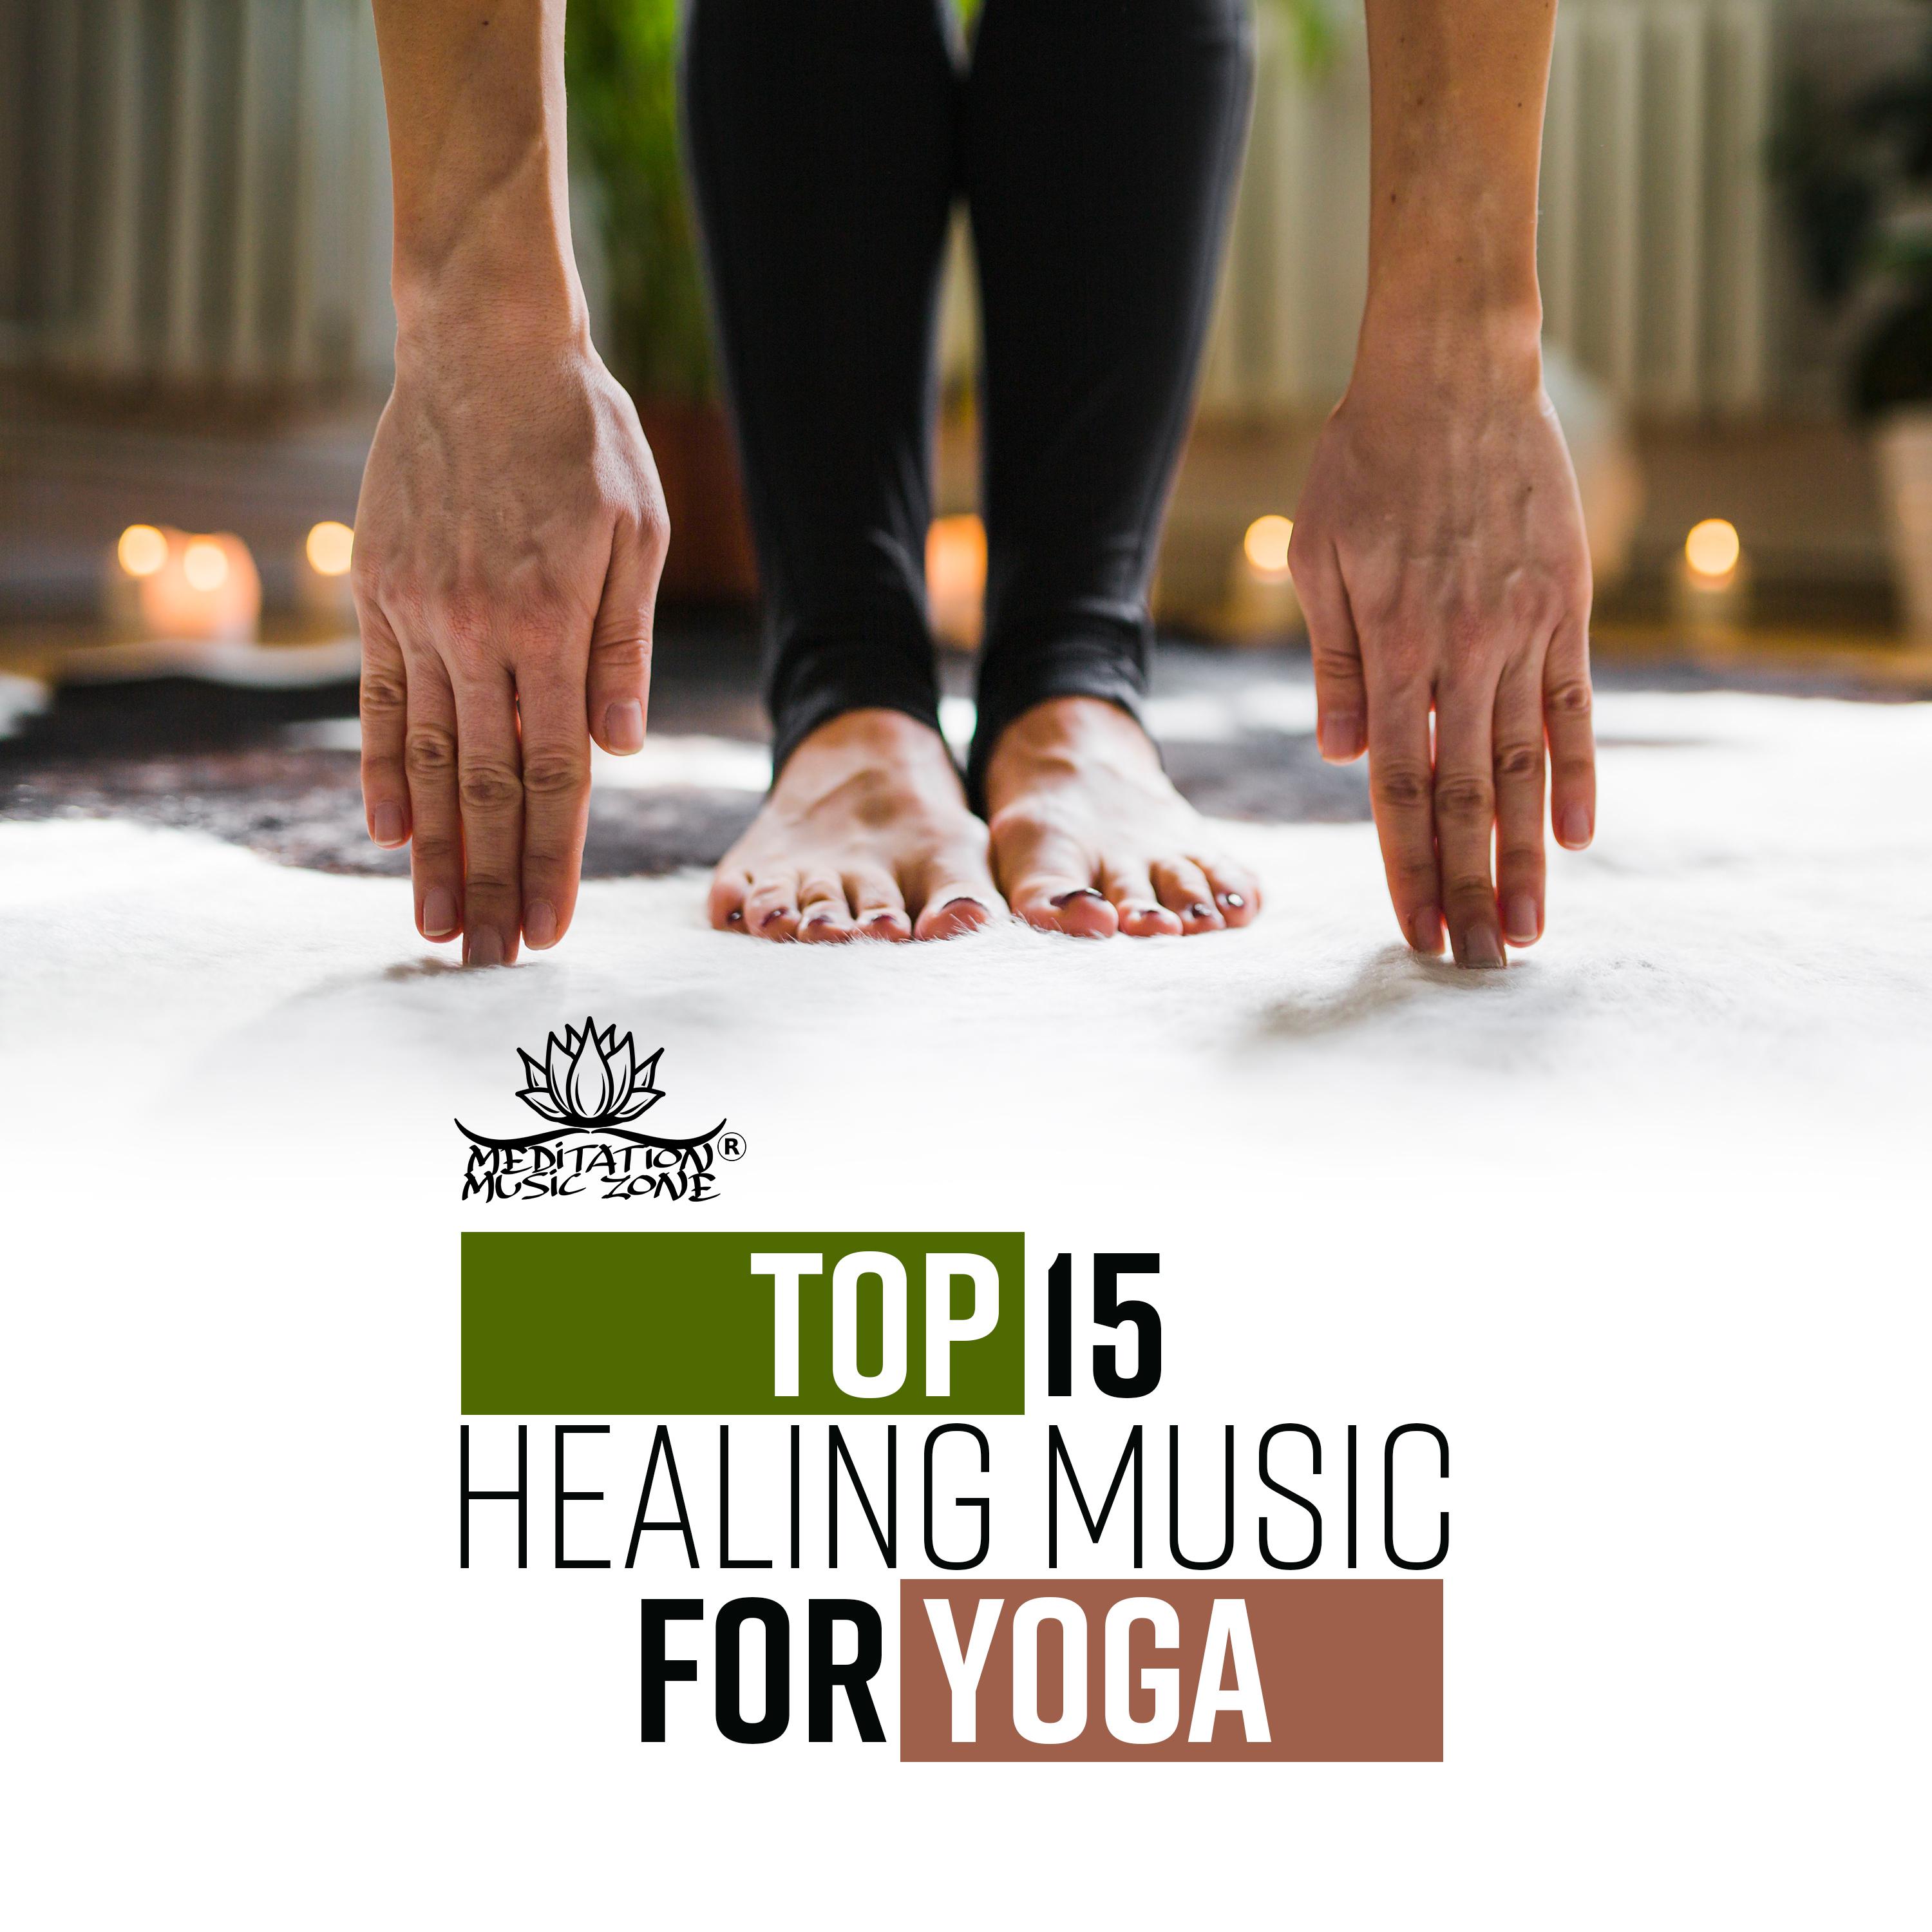 Top 15 Healing Music for Yoga (Relaxation After Long Day)